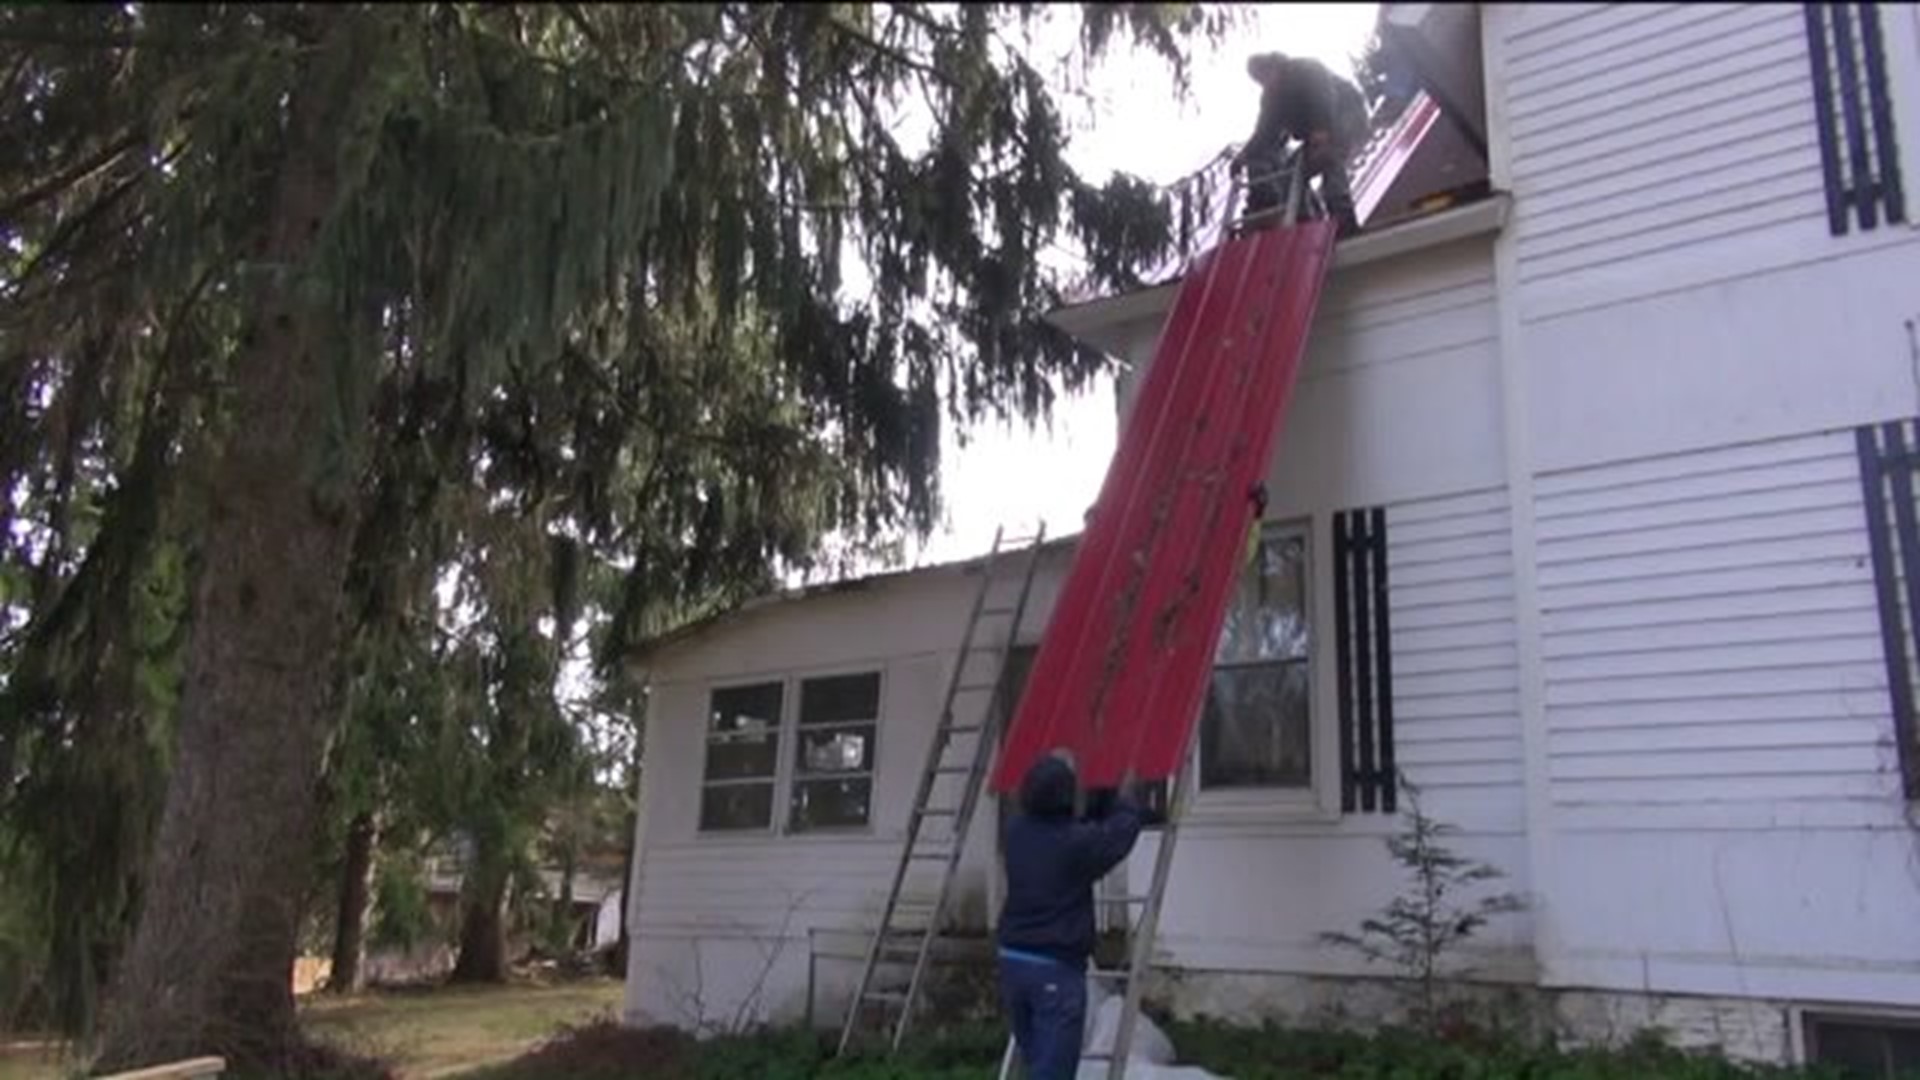 No Fire, but Firefighters Save Woman`s Home in Another Way